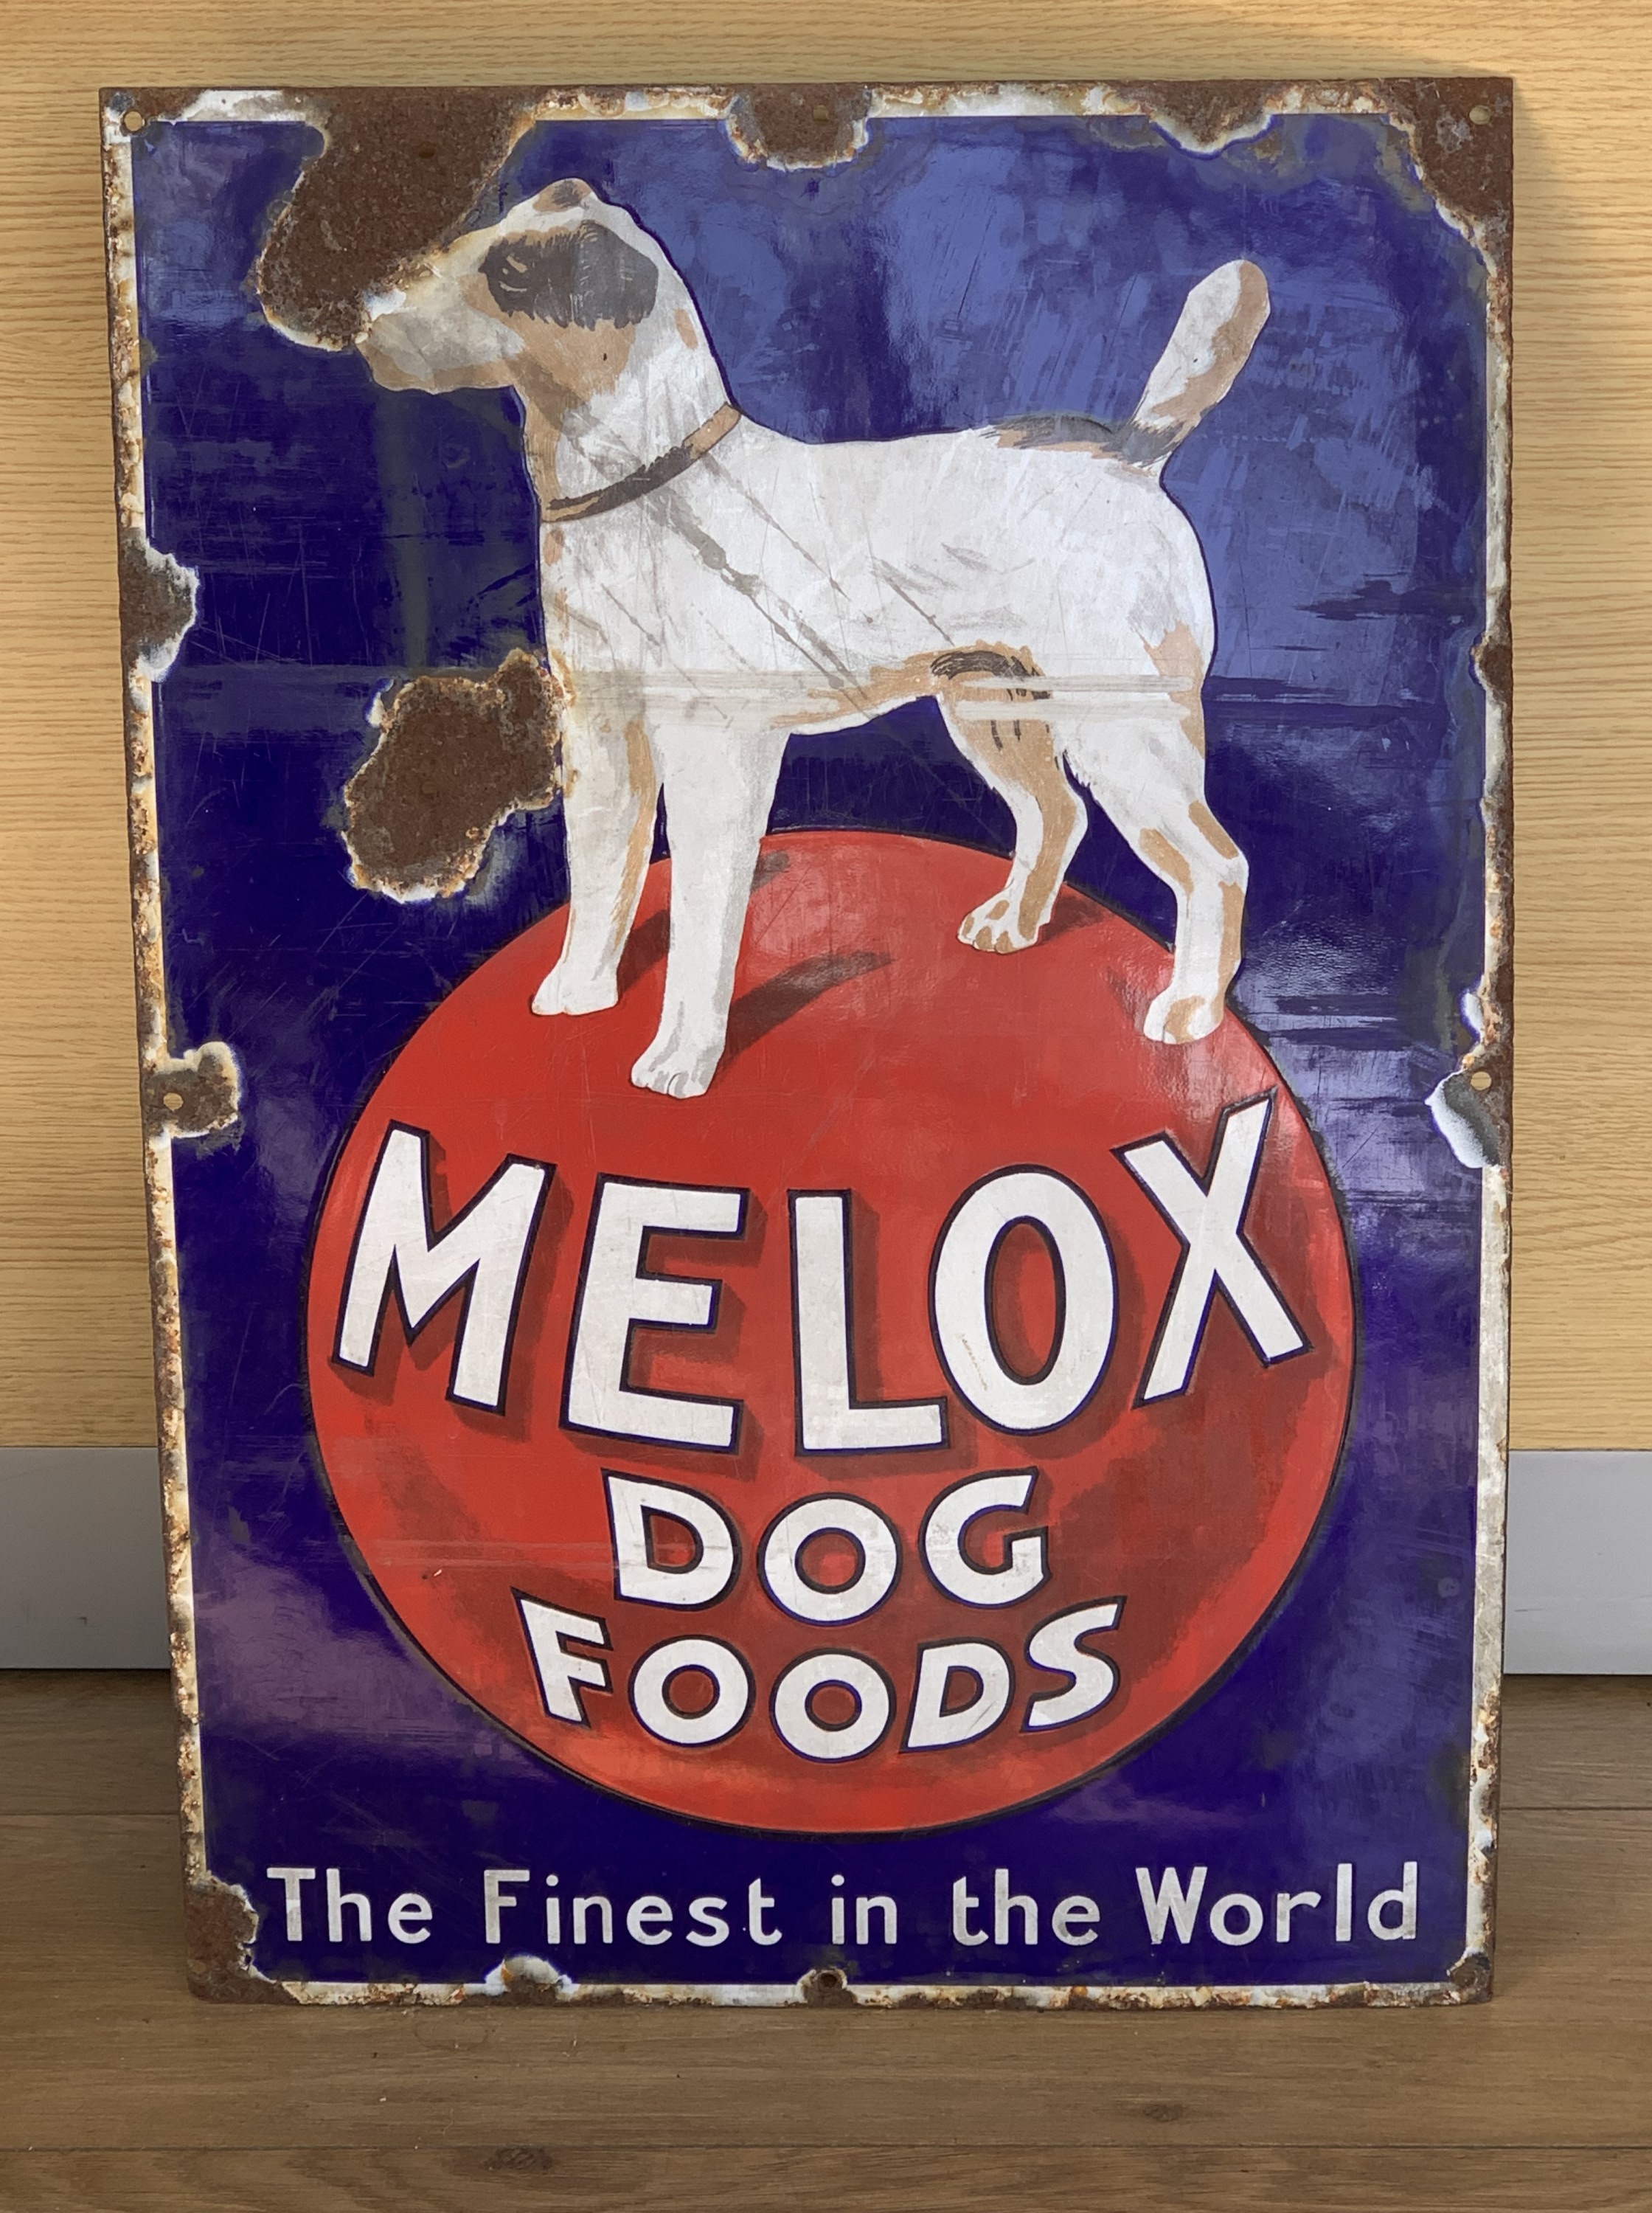 A vintage glass enamelled sign advertising "Melox Dog Foods", 66 x 46 cm - Image 2 of 2